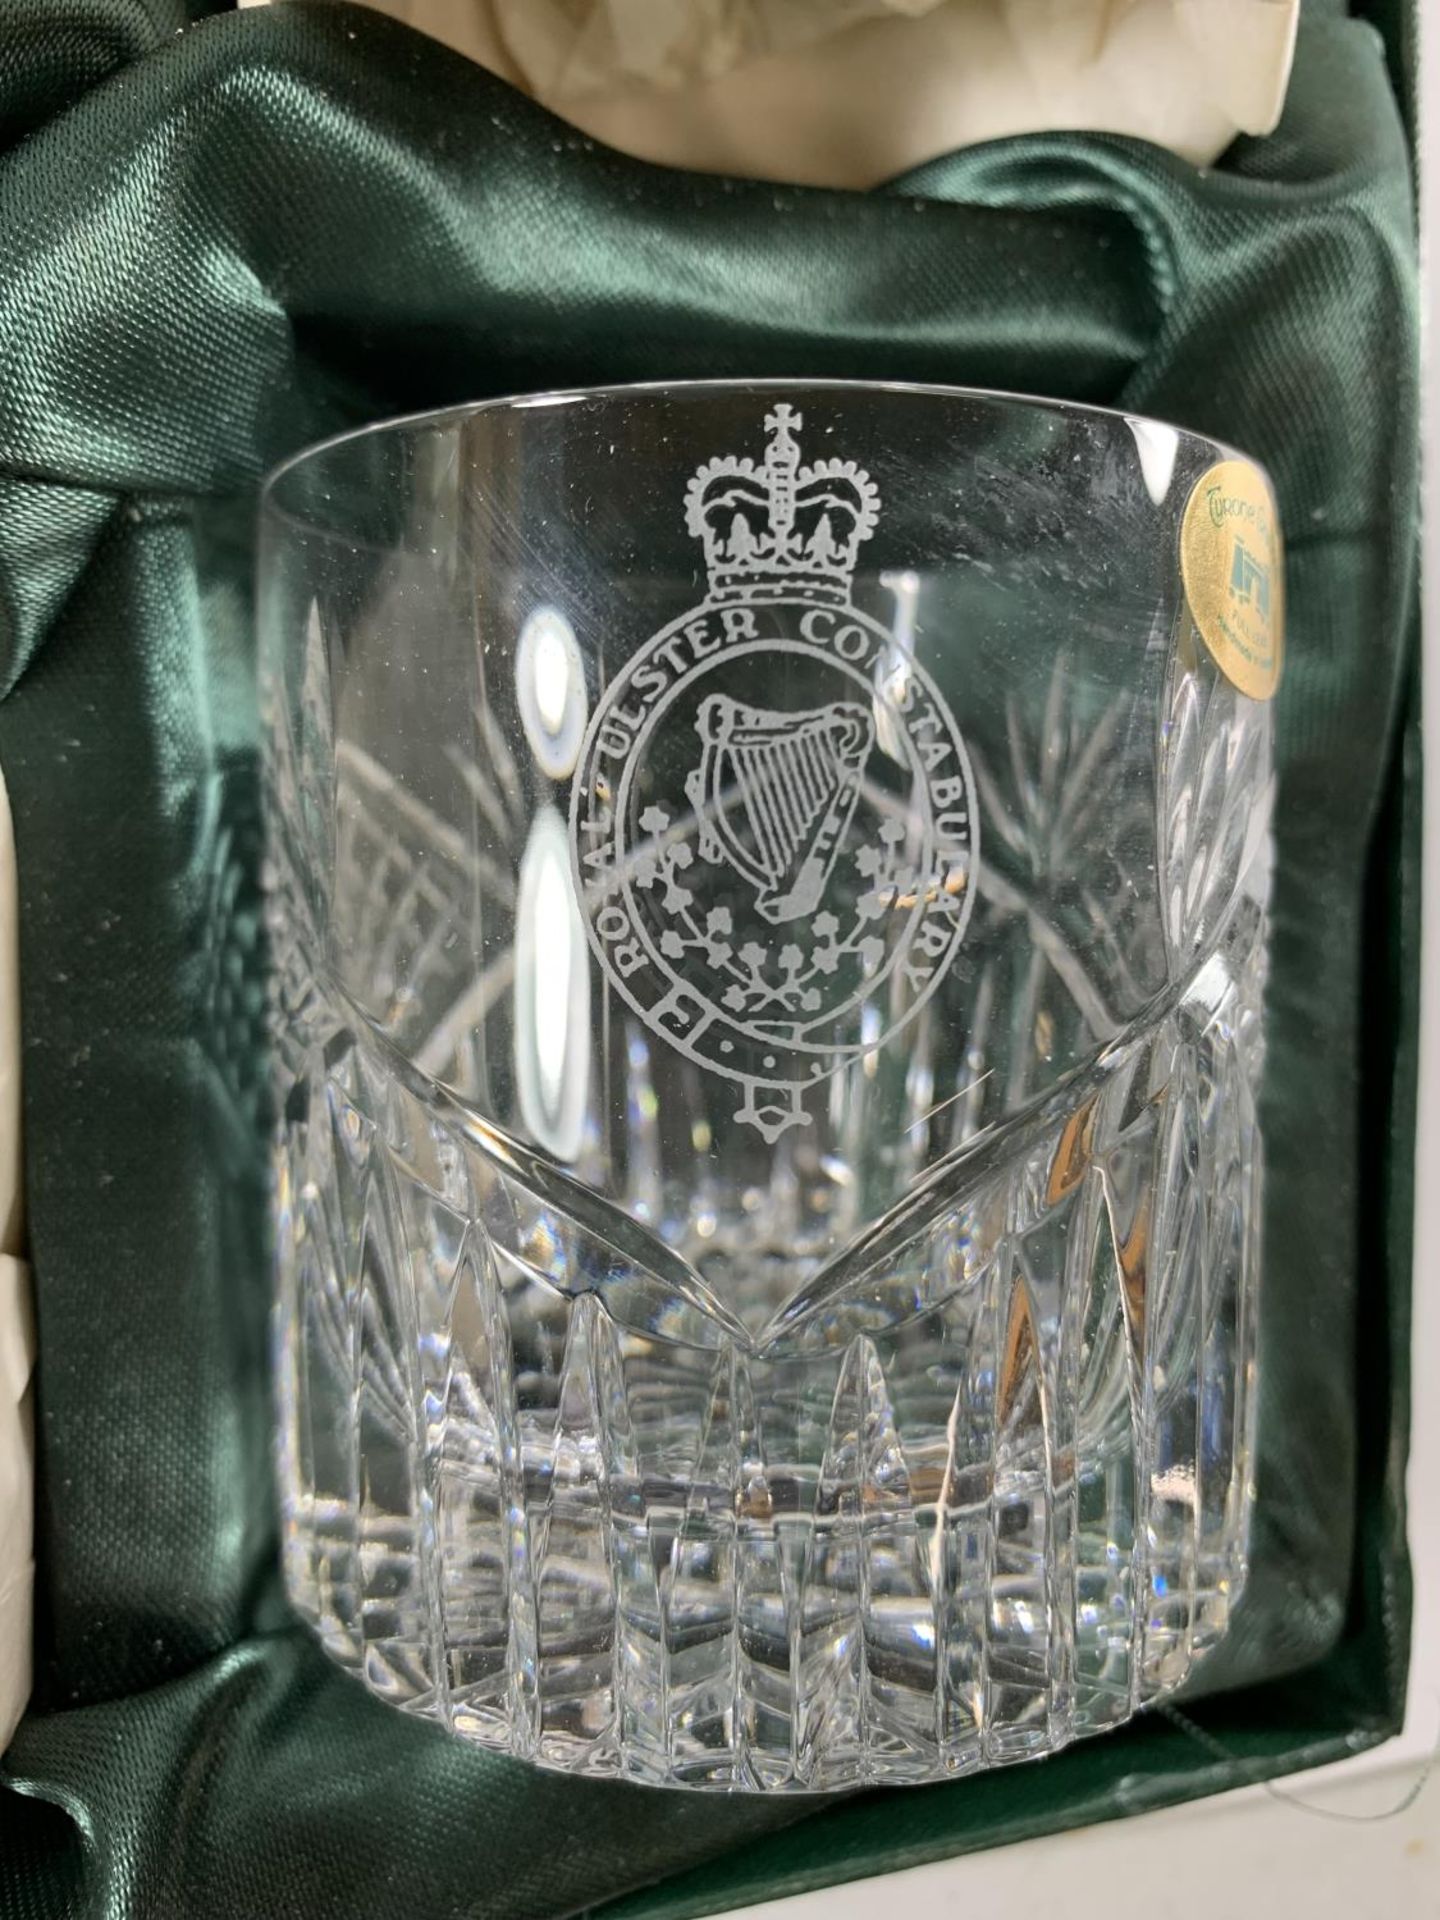 * THREE BOXED ITEMS OF PRESENTATION GLASS, WHISKY GLASS FROM ISLE OF MAN POLICE, DECANTER FROM - Image 9 of 10